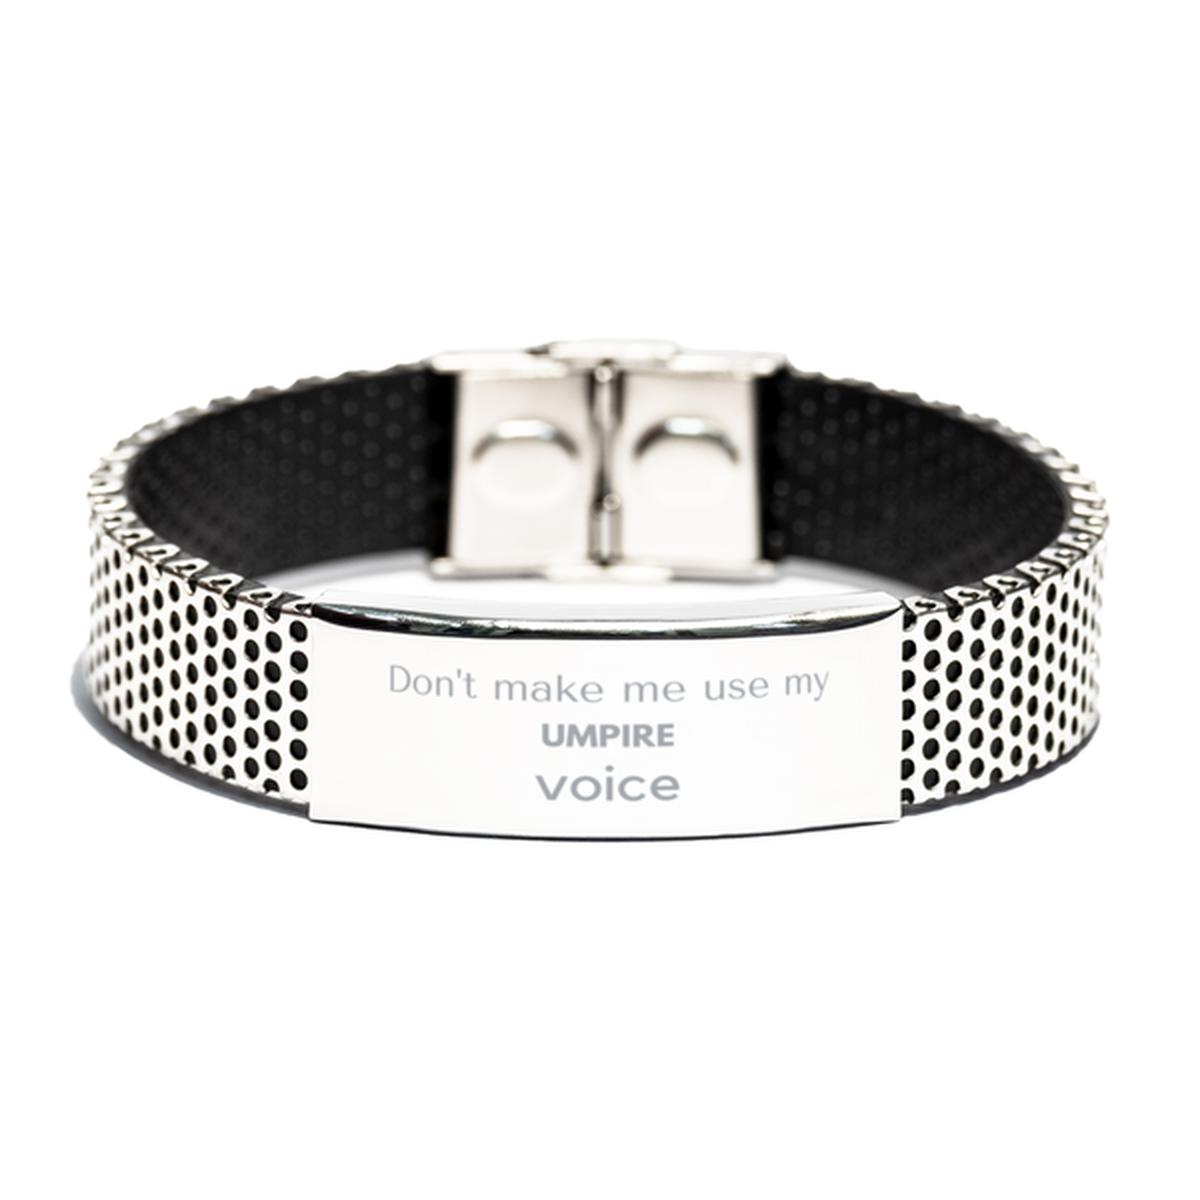 Don't make me use my Umpire voice, Sarcasm Umpire Gifts, Christmas Umpire Stainless Steel Bracelet Birthday Unique Gifts For Umpire Coworkers, Men, Women, Colleague, Friends